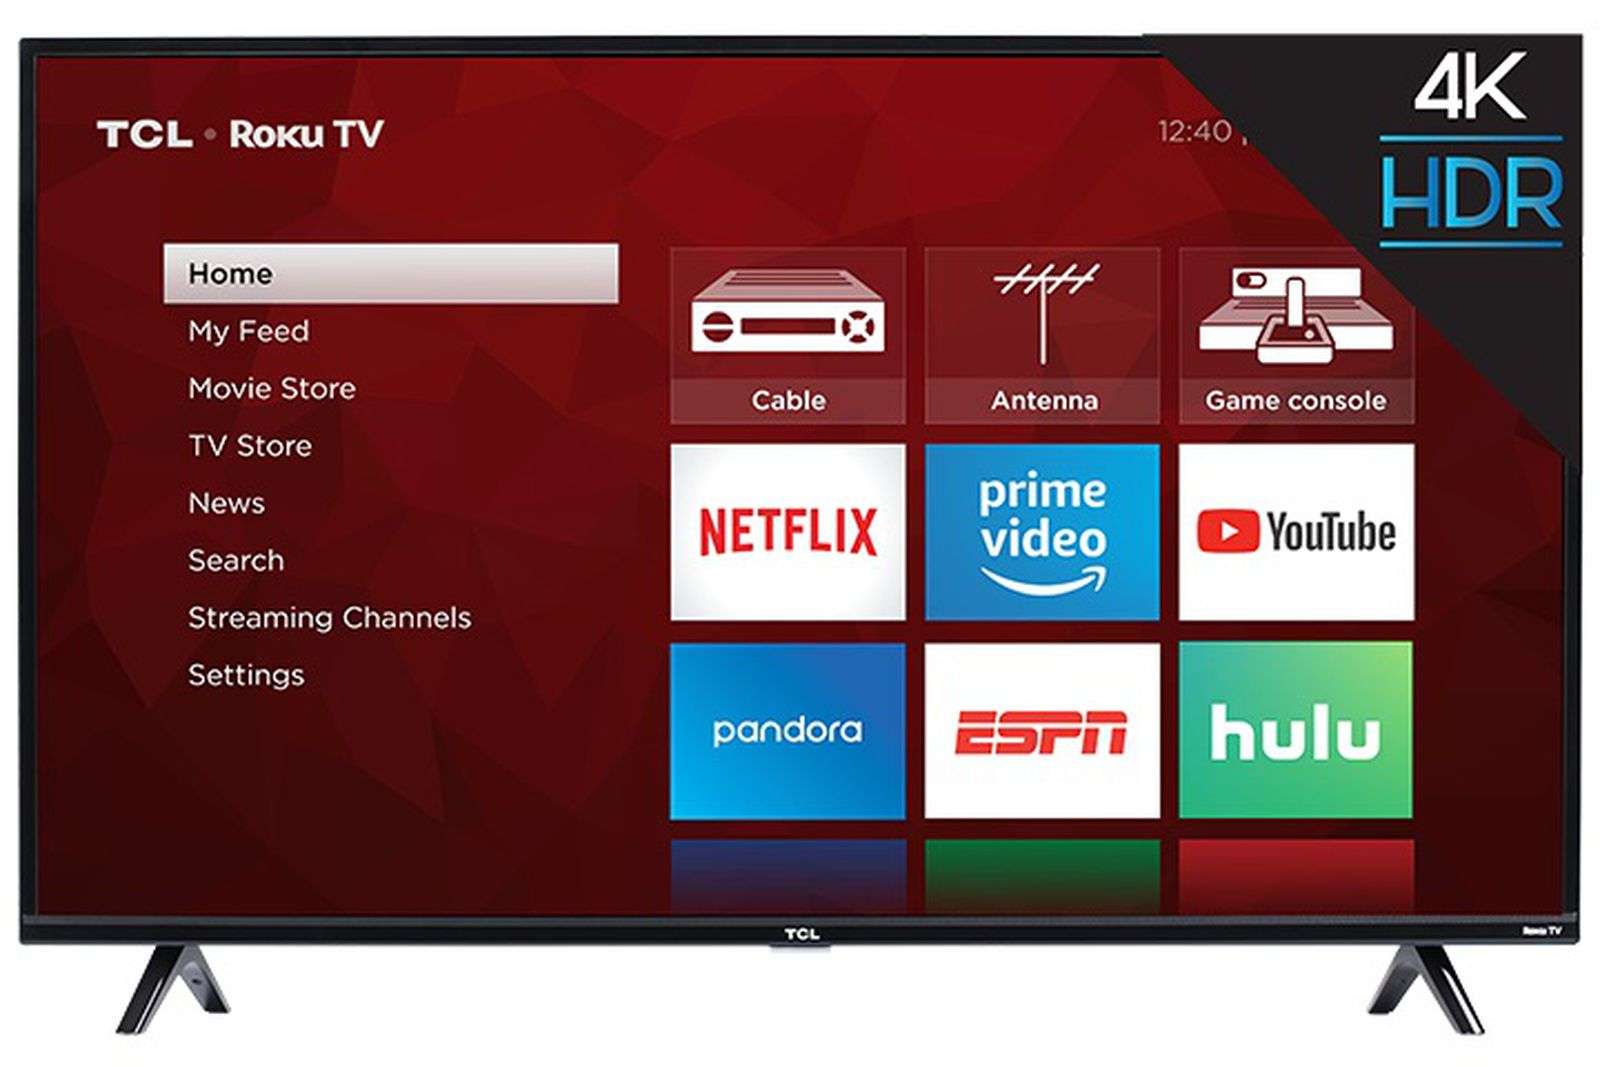 TCL on AirPlay